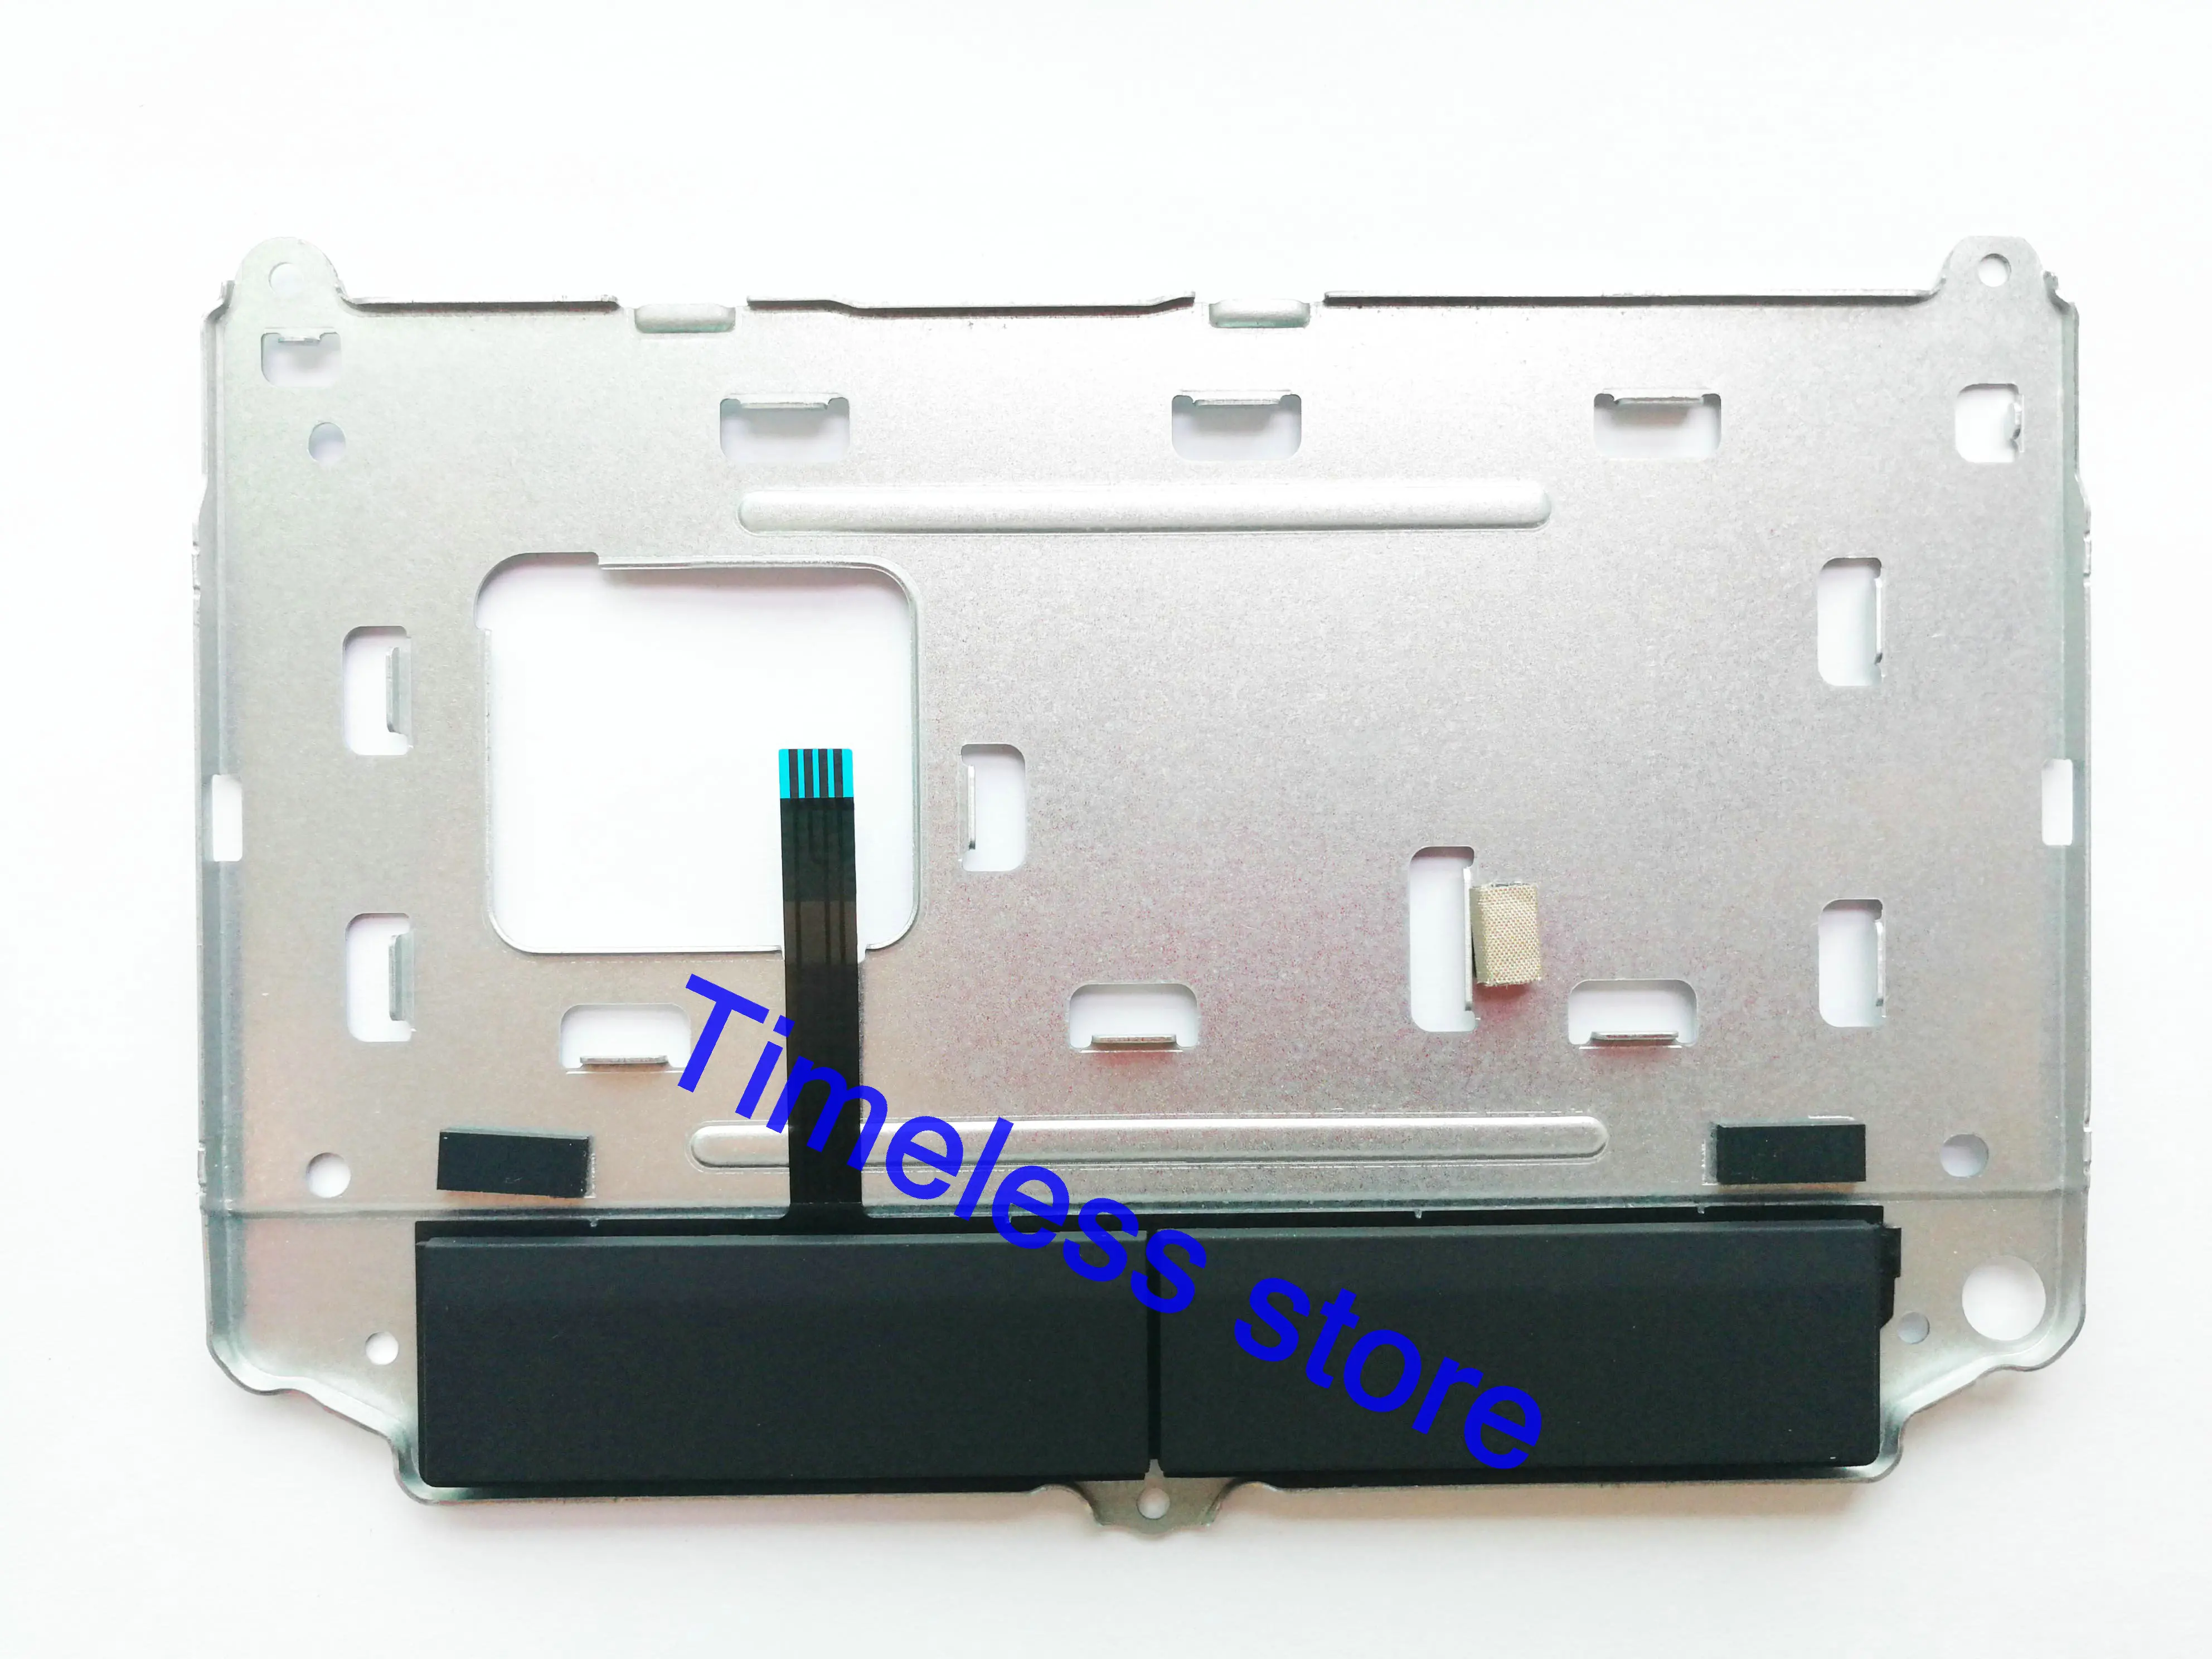 

new for Dell for ALIENWARE 15 R3 17 R4 R5 touchpad mouse button board 04GG2D 4GG2D cn-04GG2D